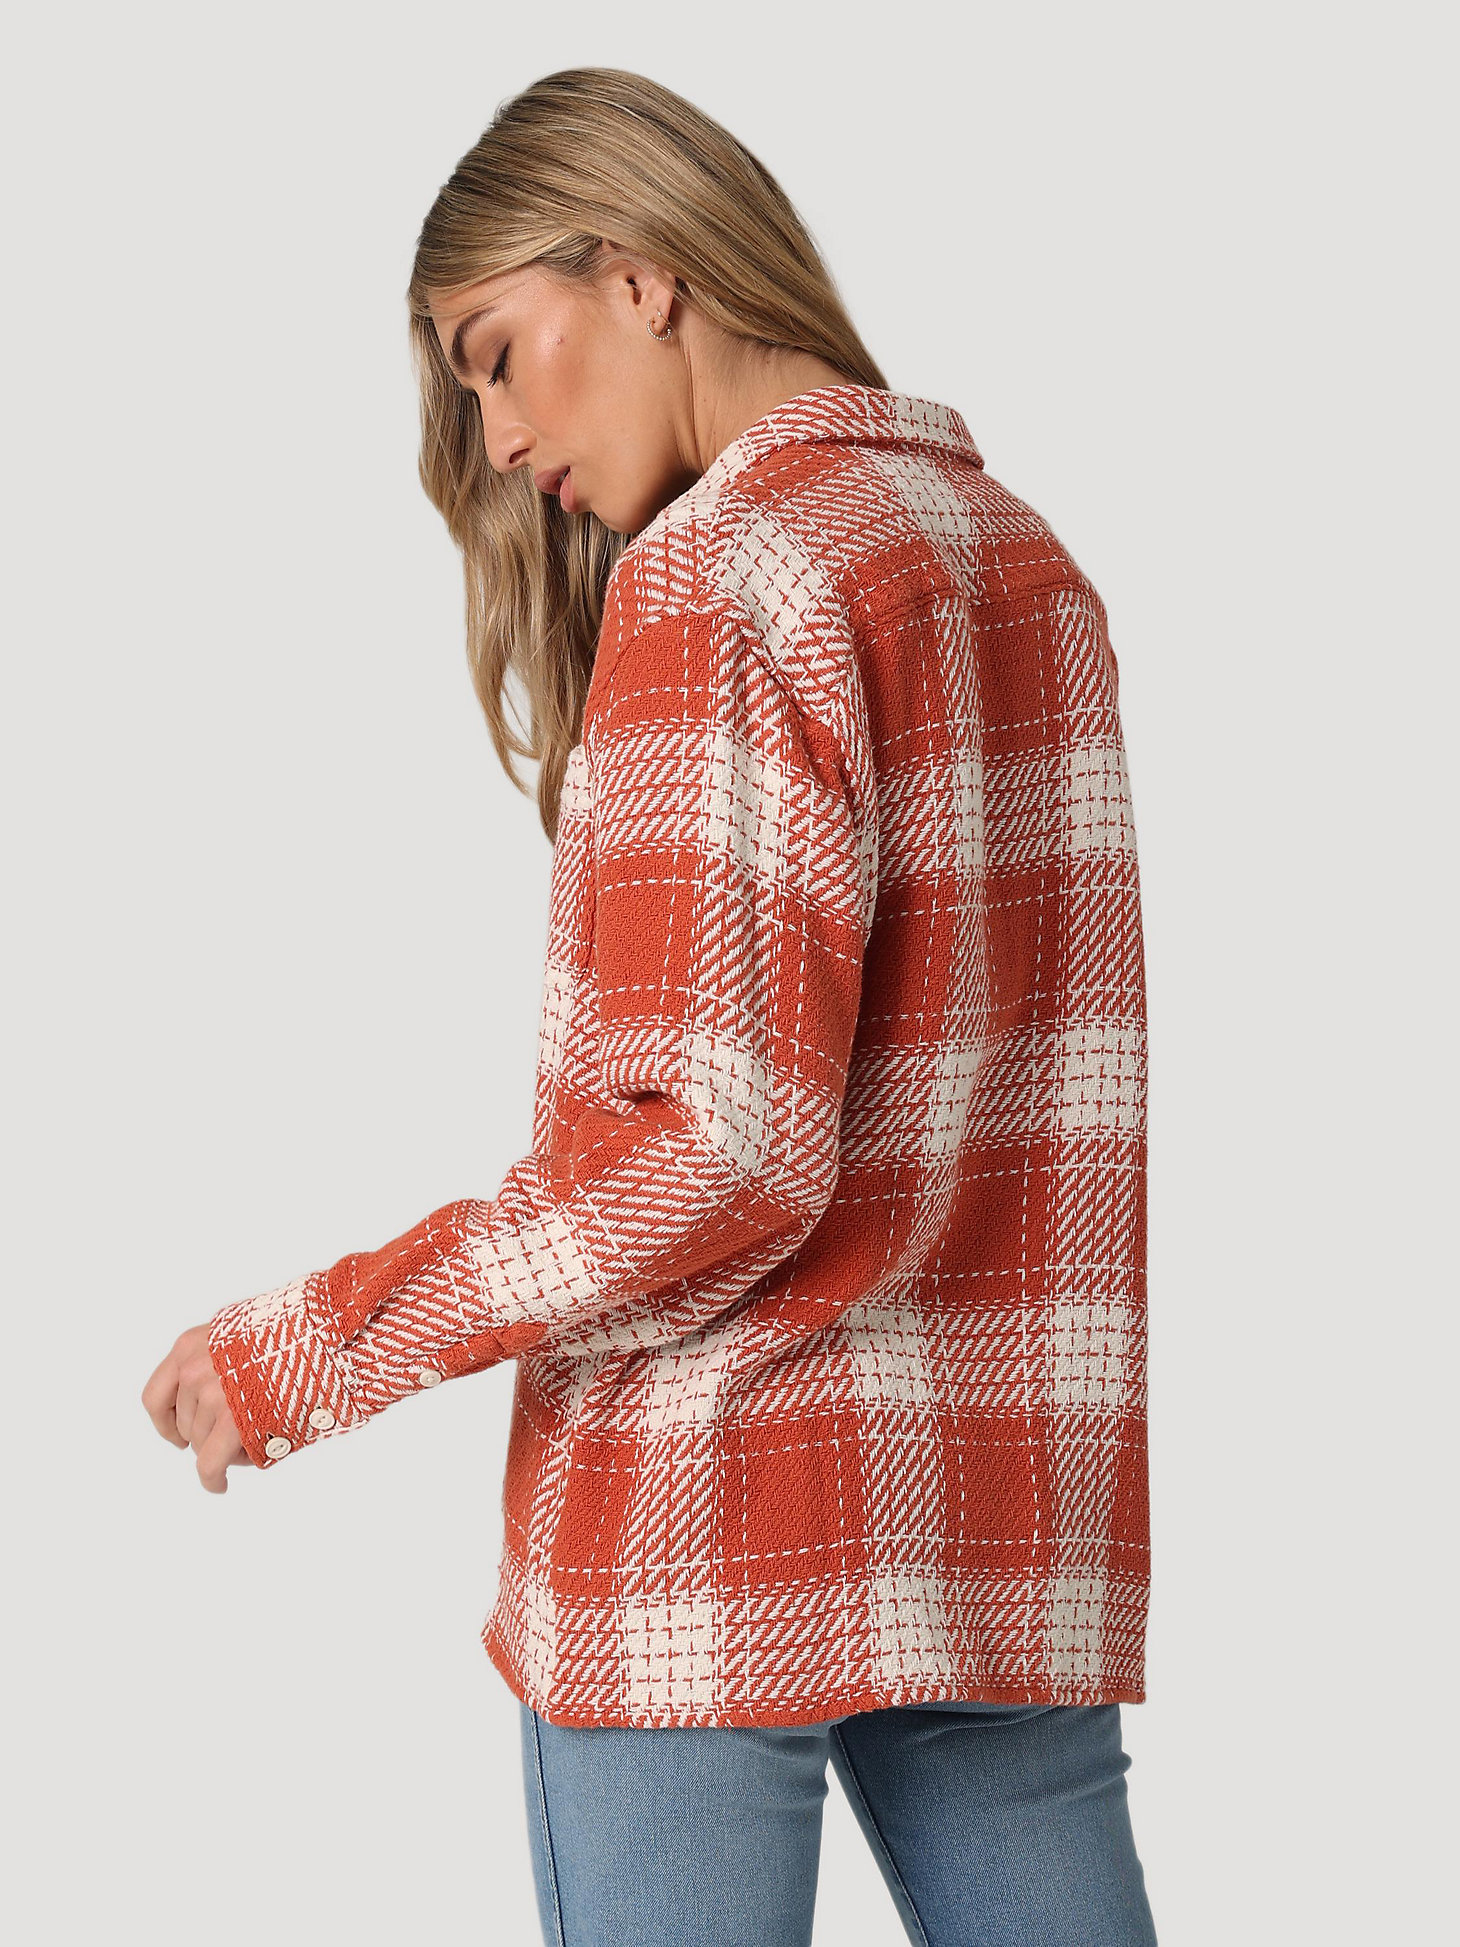 Women's Tapestry Overshirt in Ginger Spice alternative view 1